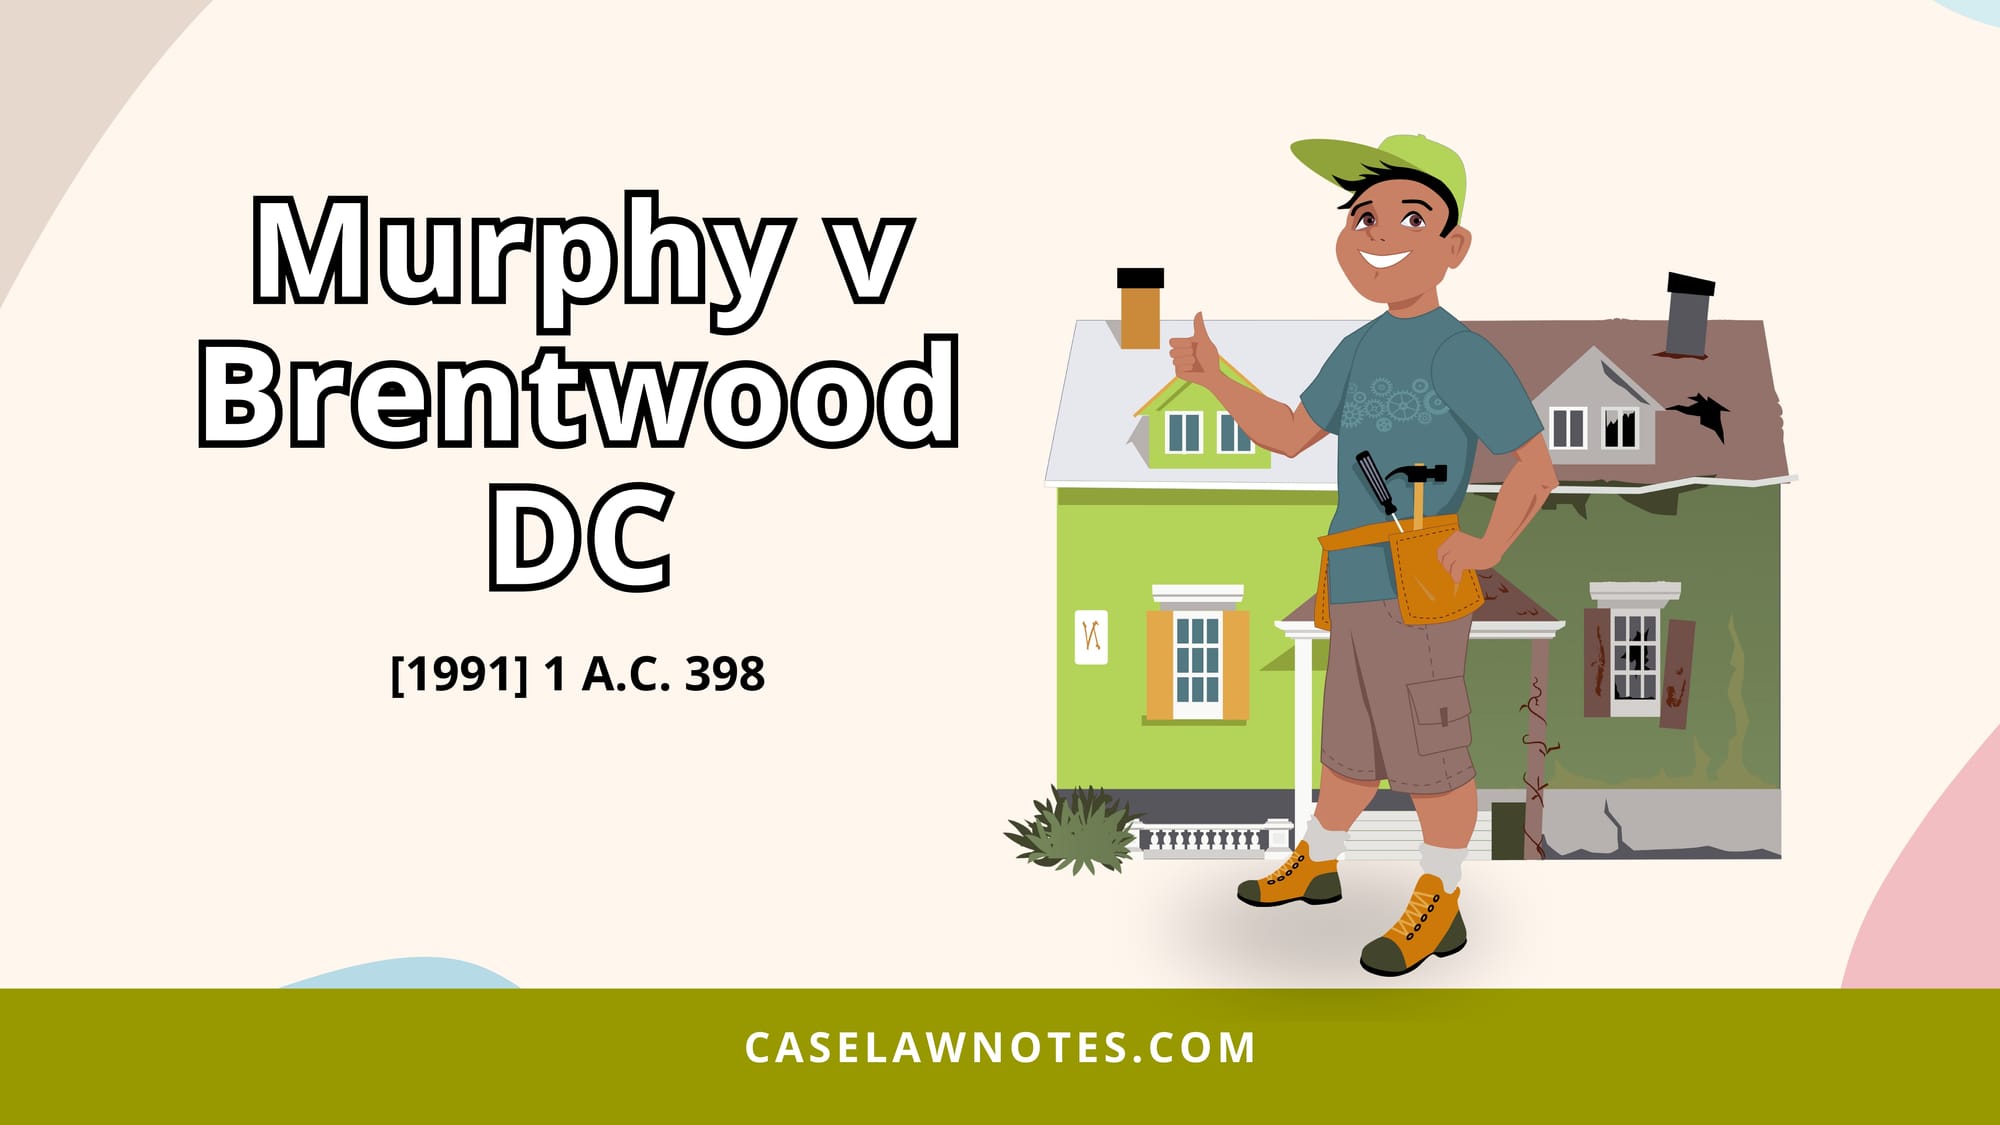 Murphy v Brentwood District Council - duty of care - negligence - building inspection